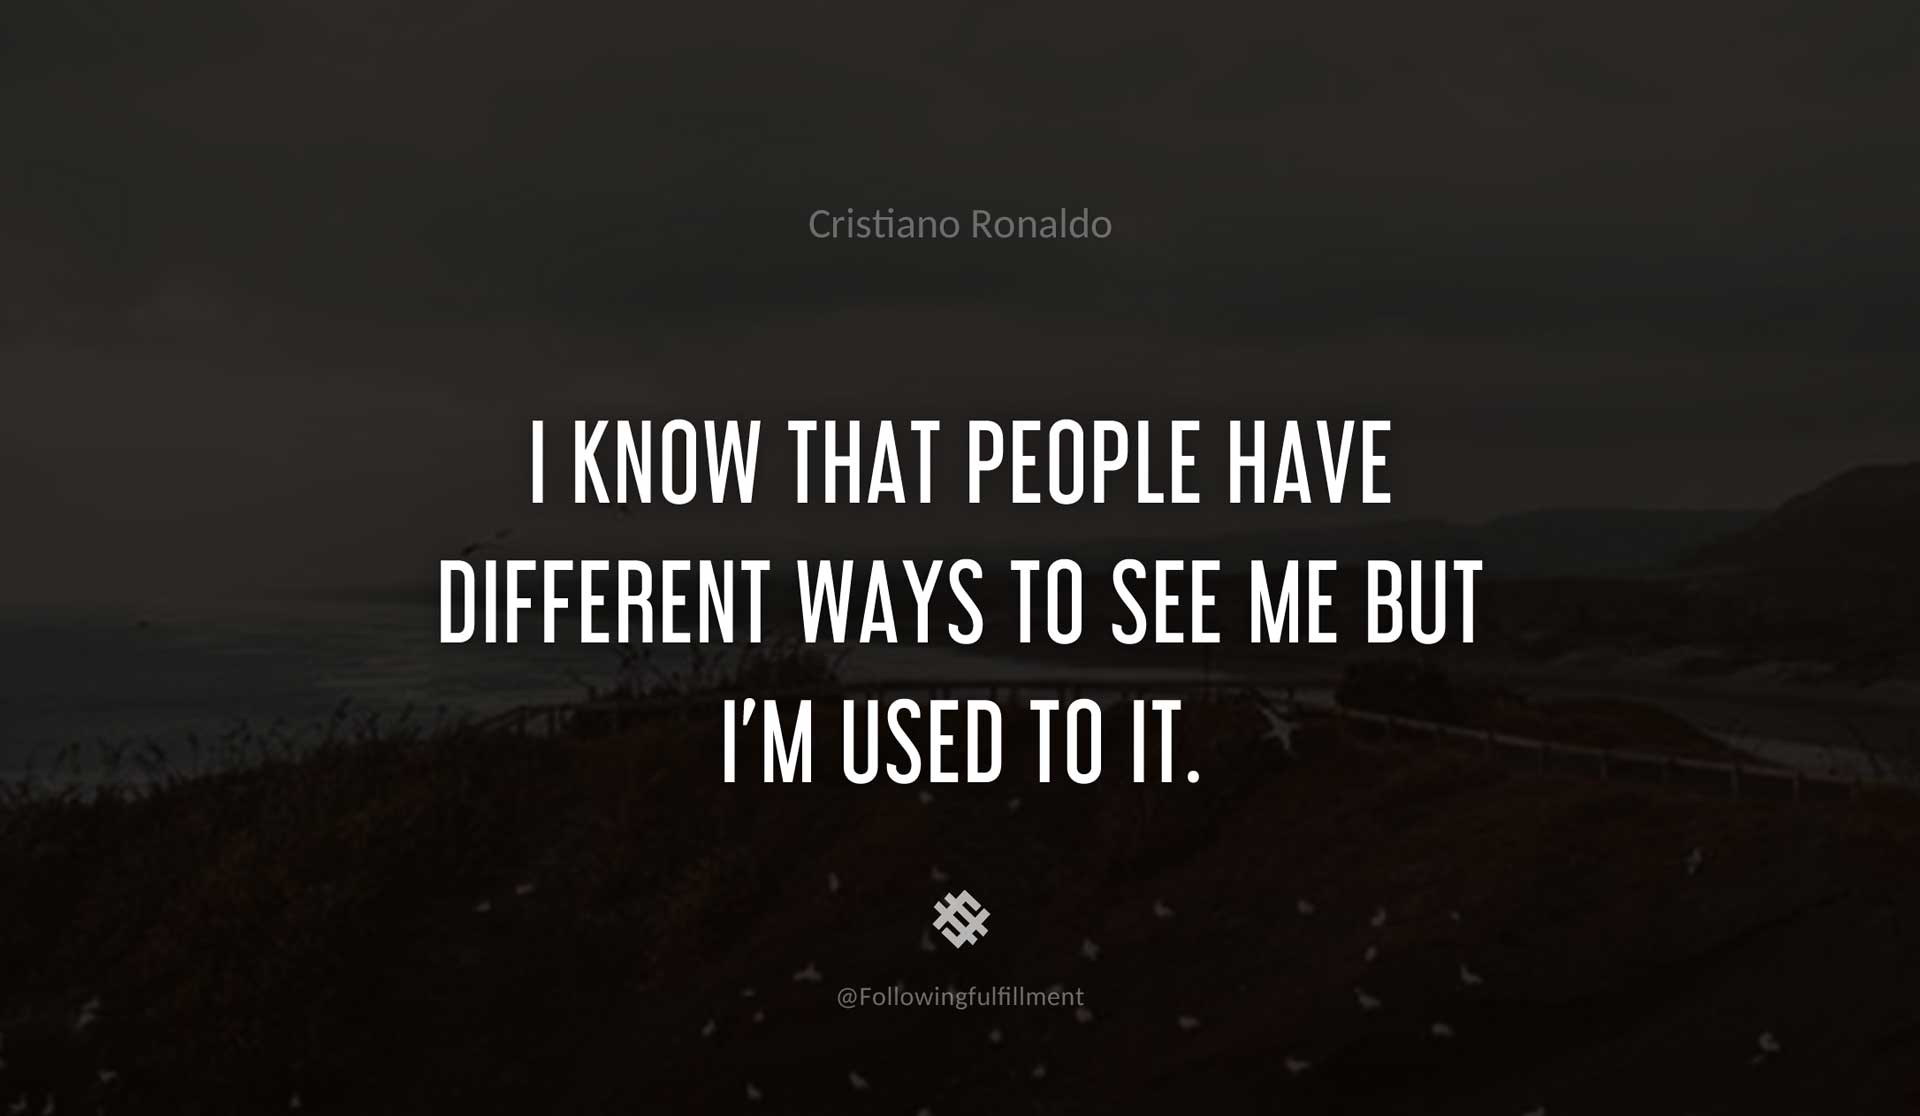 I-know-that-people-have-different-ways-to-see-me-but-I'm-used-to-it.-CRISTIANO-RONALDO-Quote.jpg